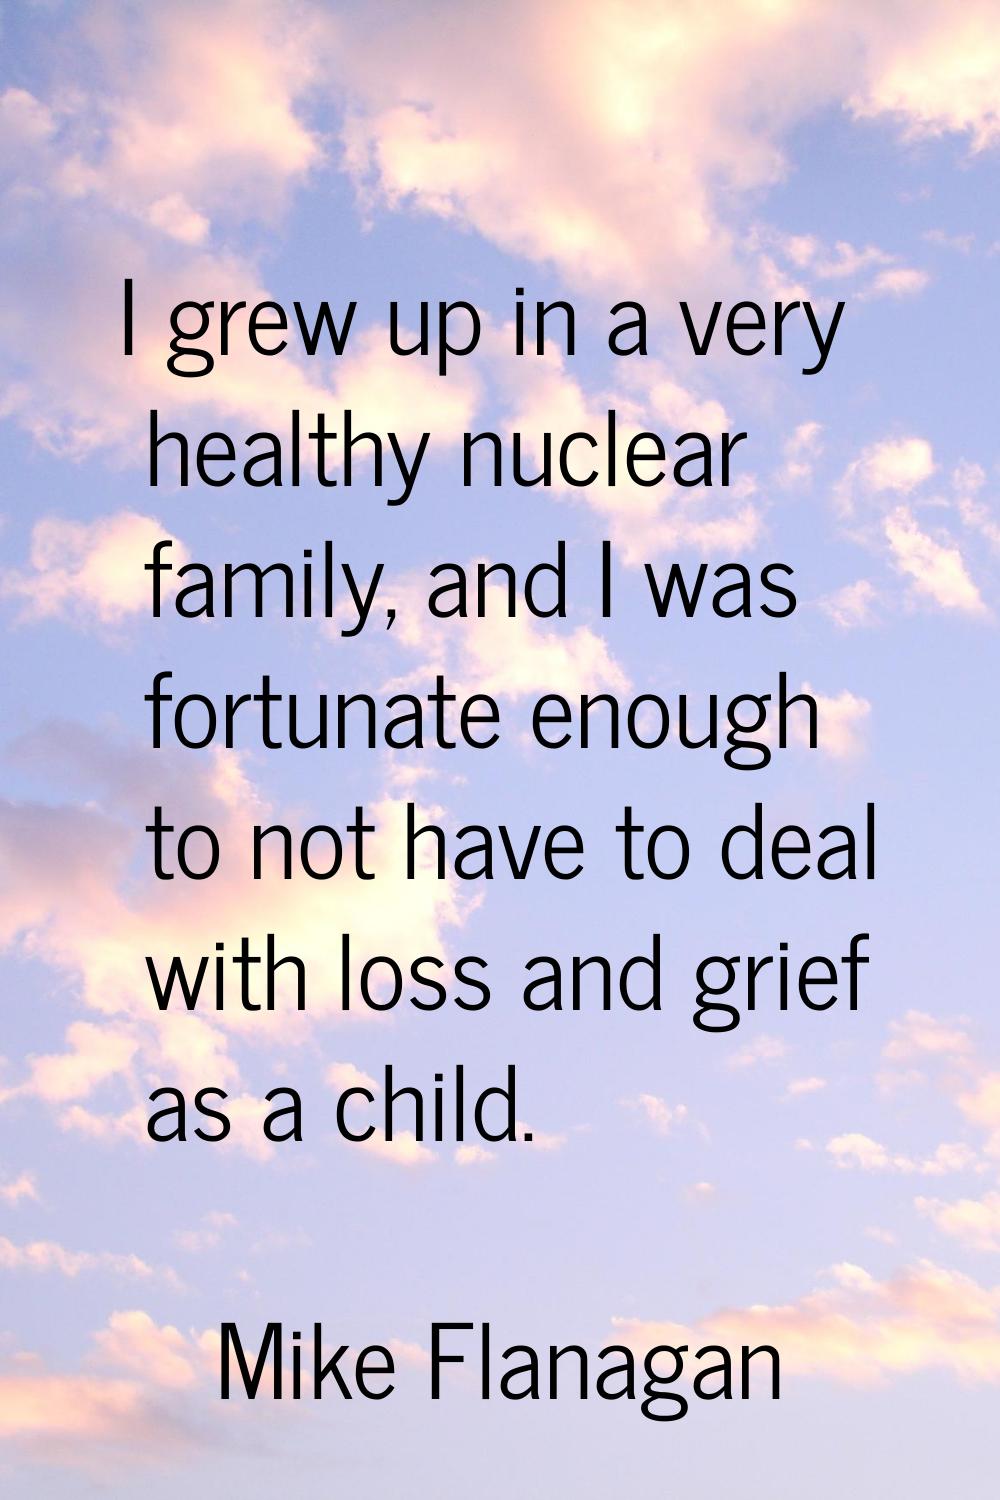 I grew up in a very healthy nuclear family, and I was fortunate enough to not have to deal with los